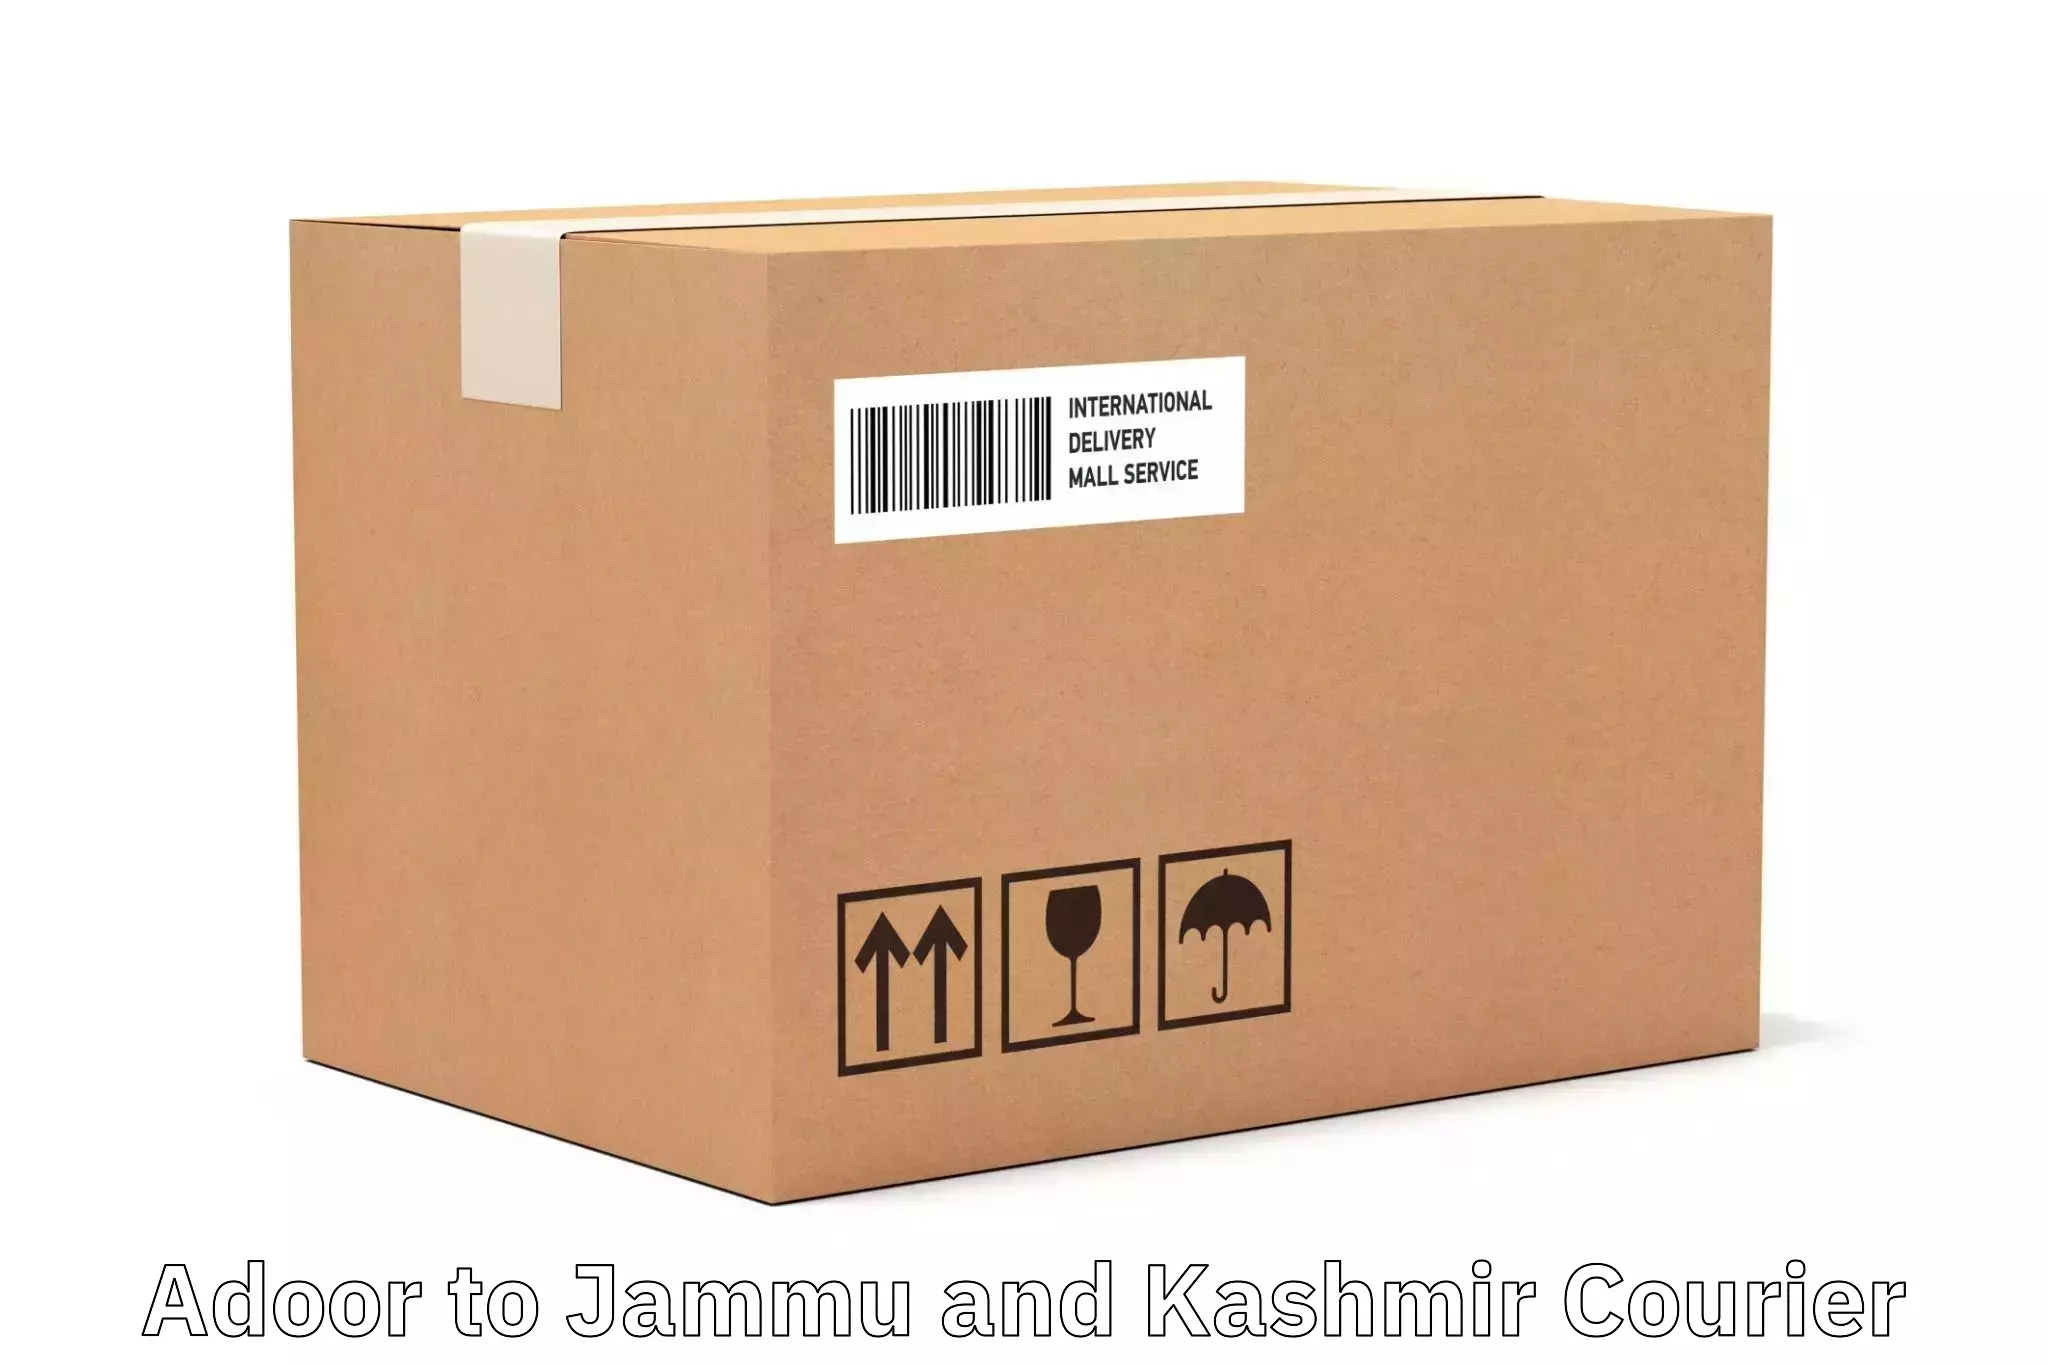 Comprehensive shipping network Adoor to Budgam